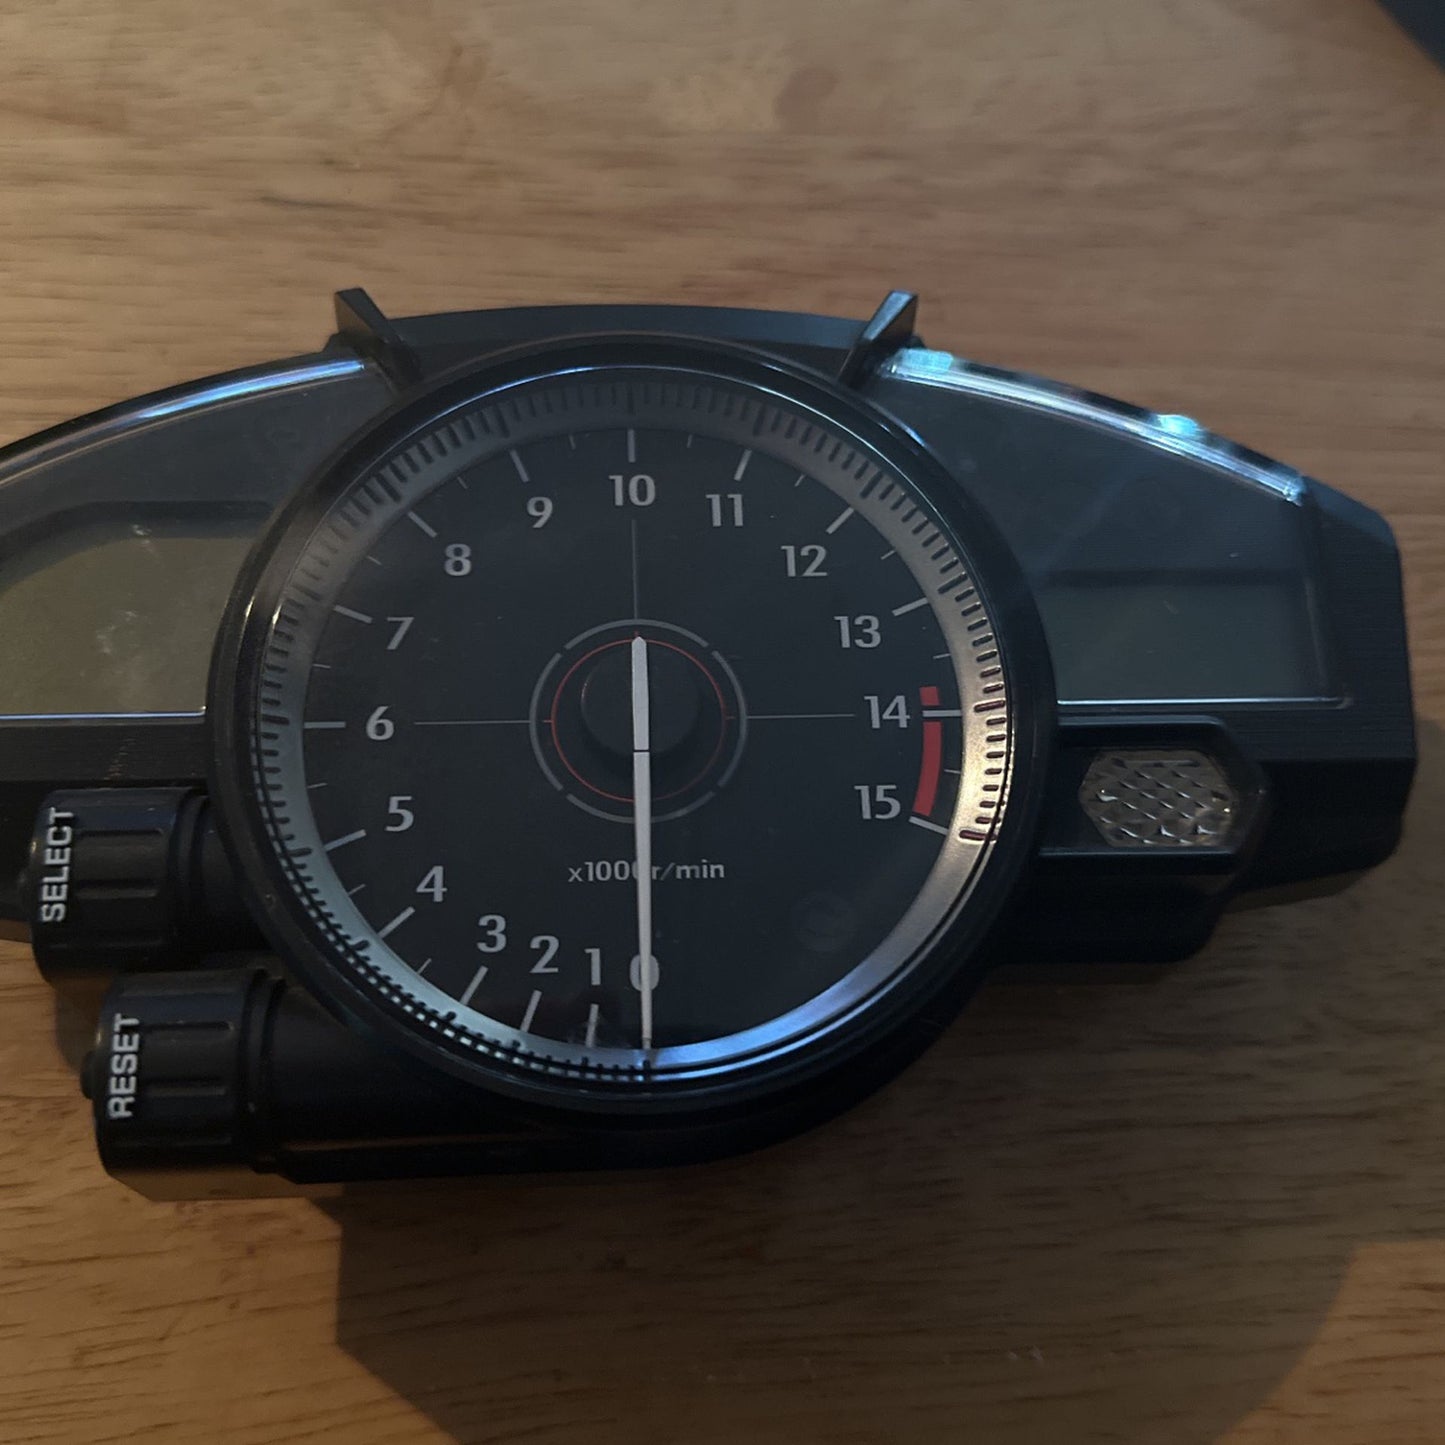 07 08 Yamaha YZF R1 Speedometer Gauges Odometer approx. 24,000 Miles